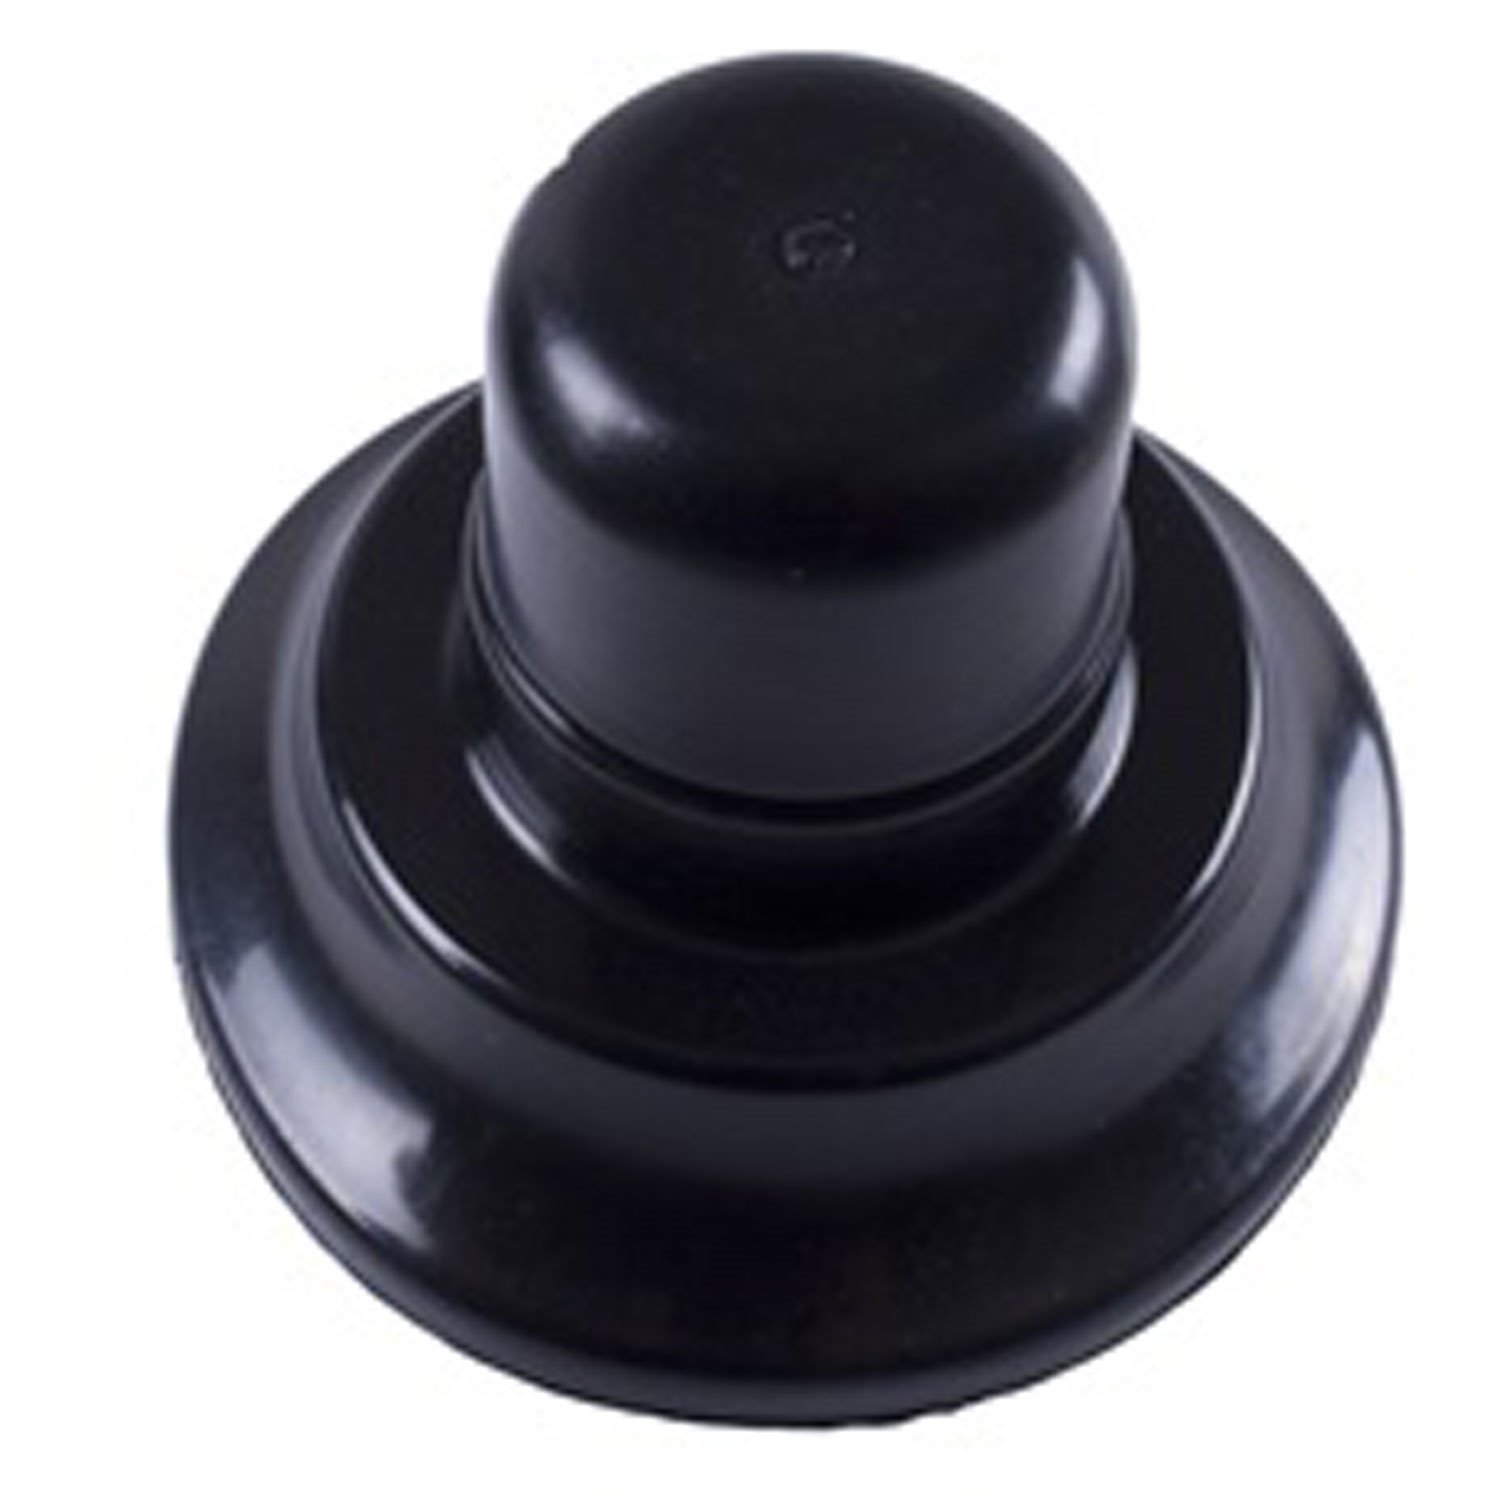 This plastic axle hub dust cap from Omix-ADA